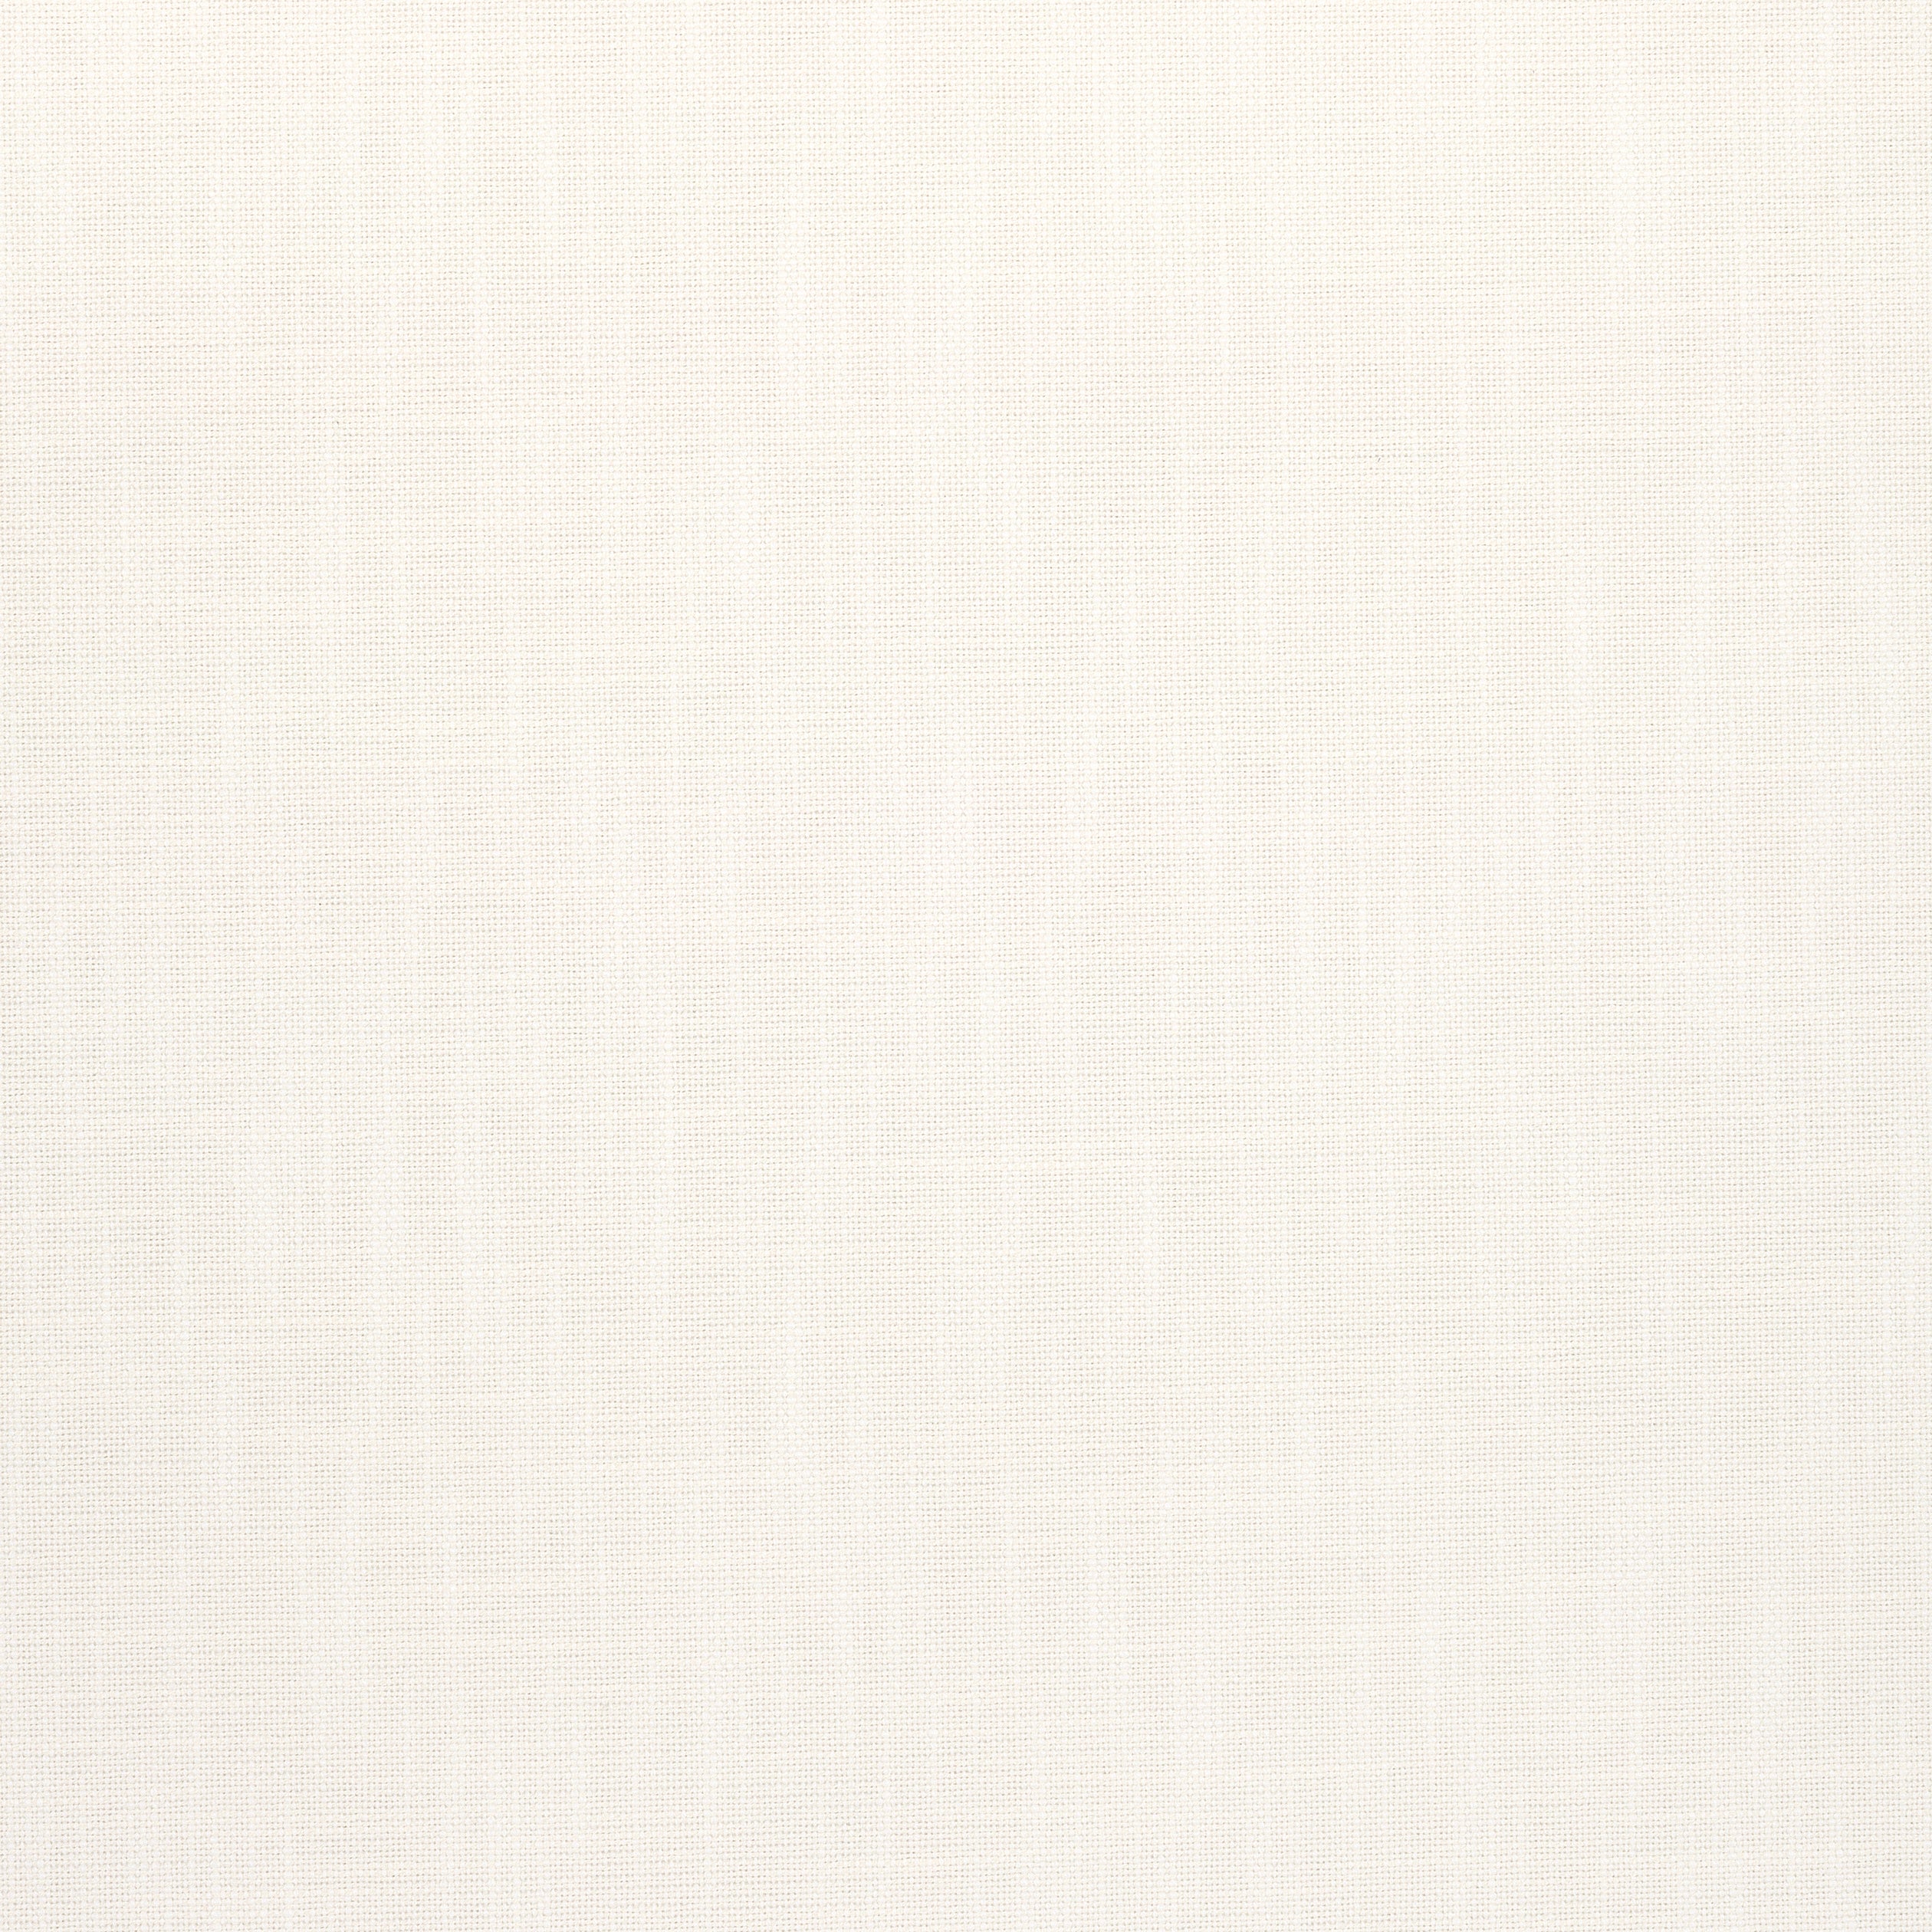 Bristol fabric in ivory color - pattern number W73417 - by Thibaut in the Landmark Textures collection